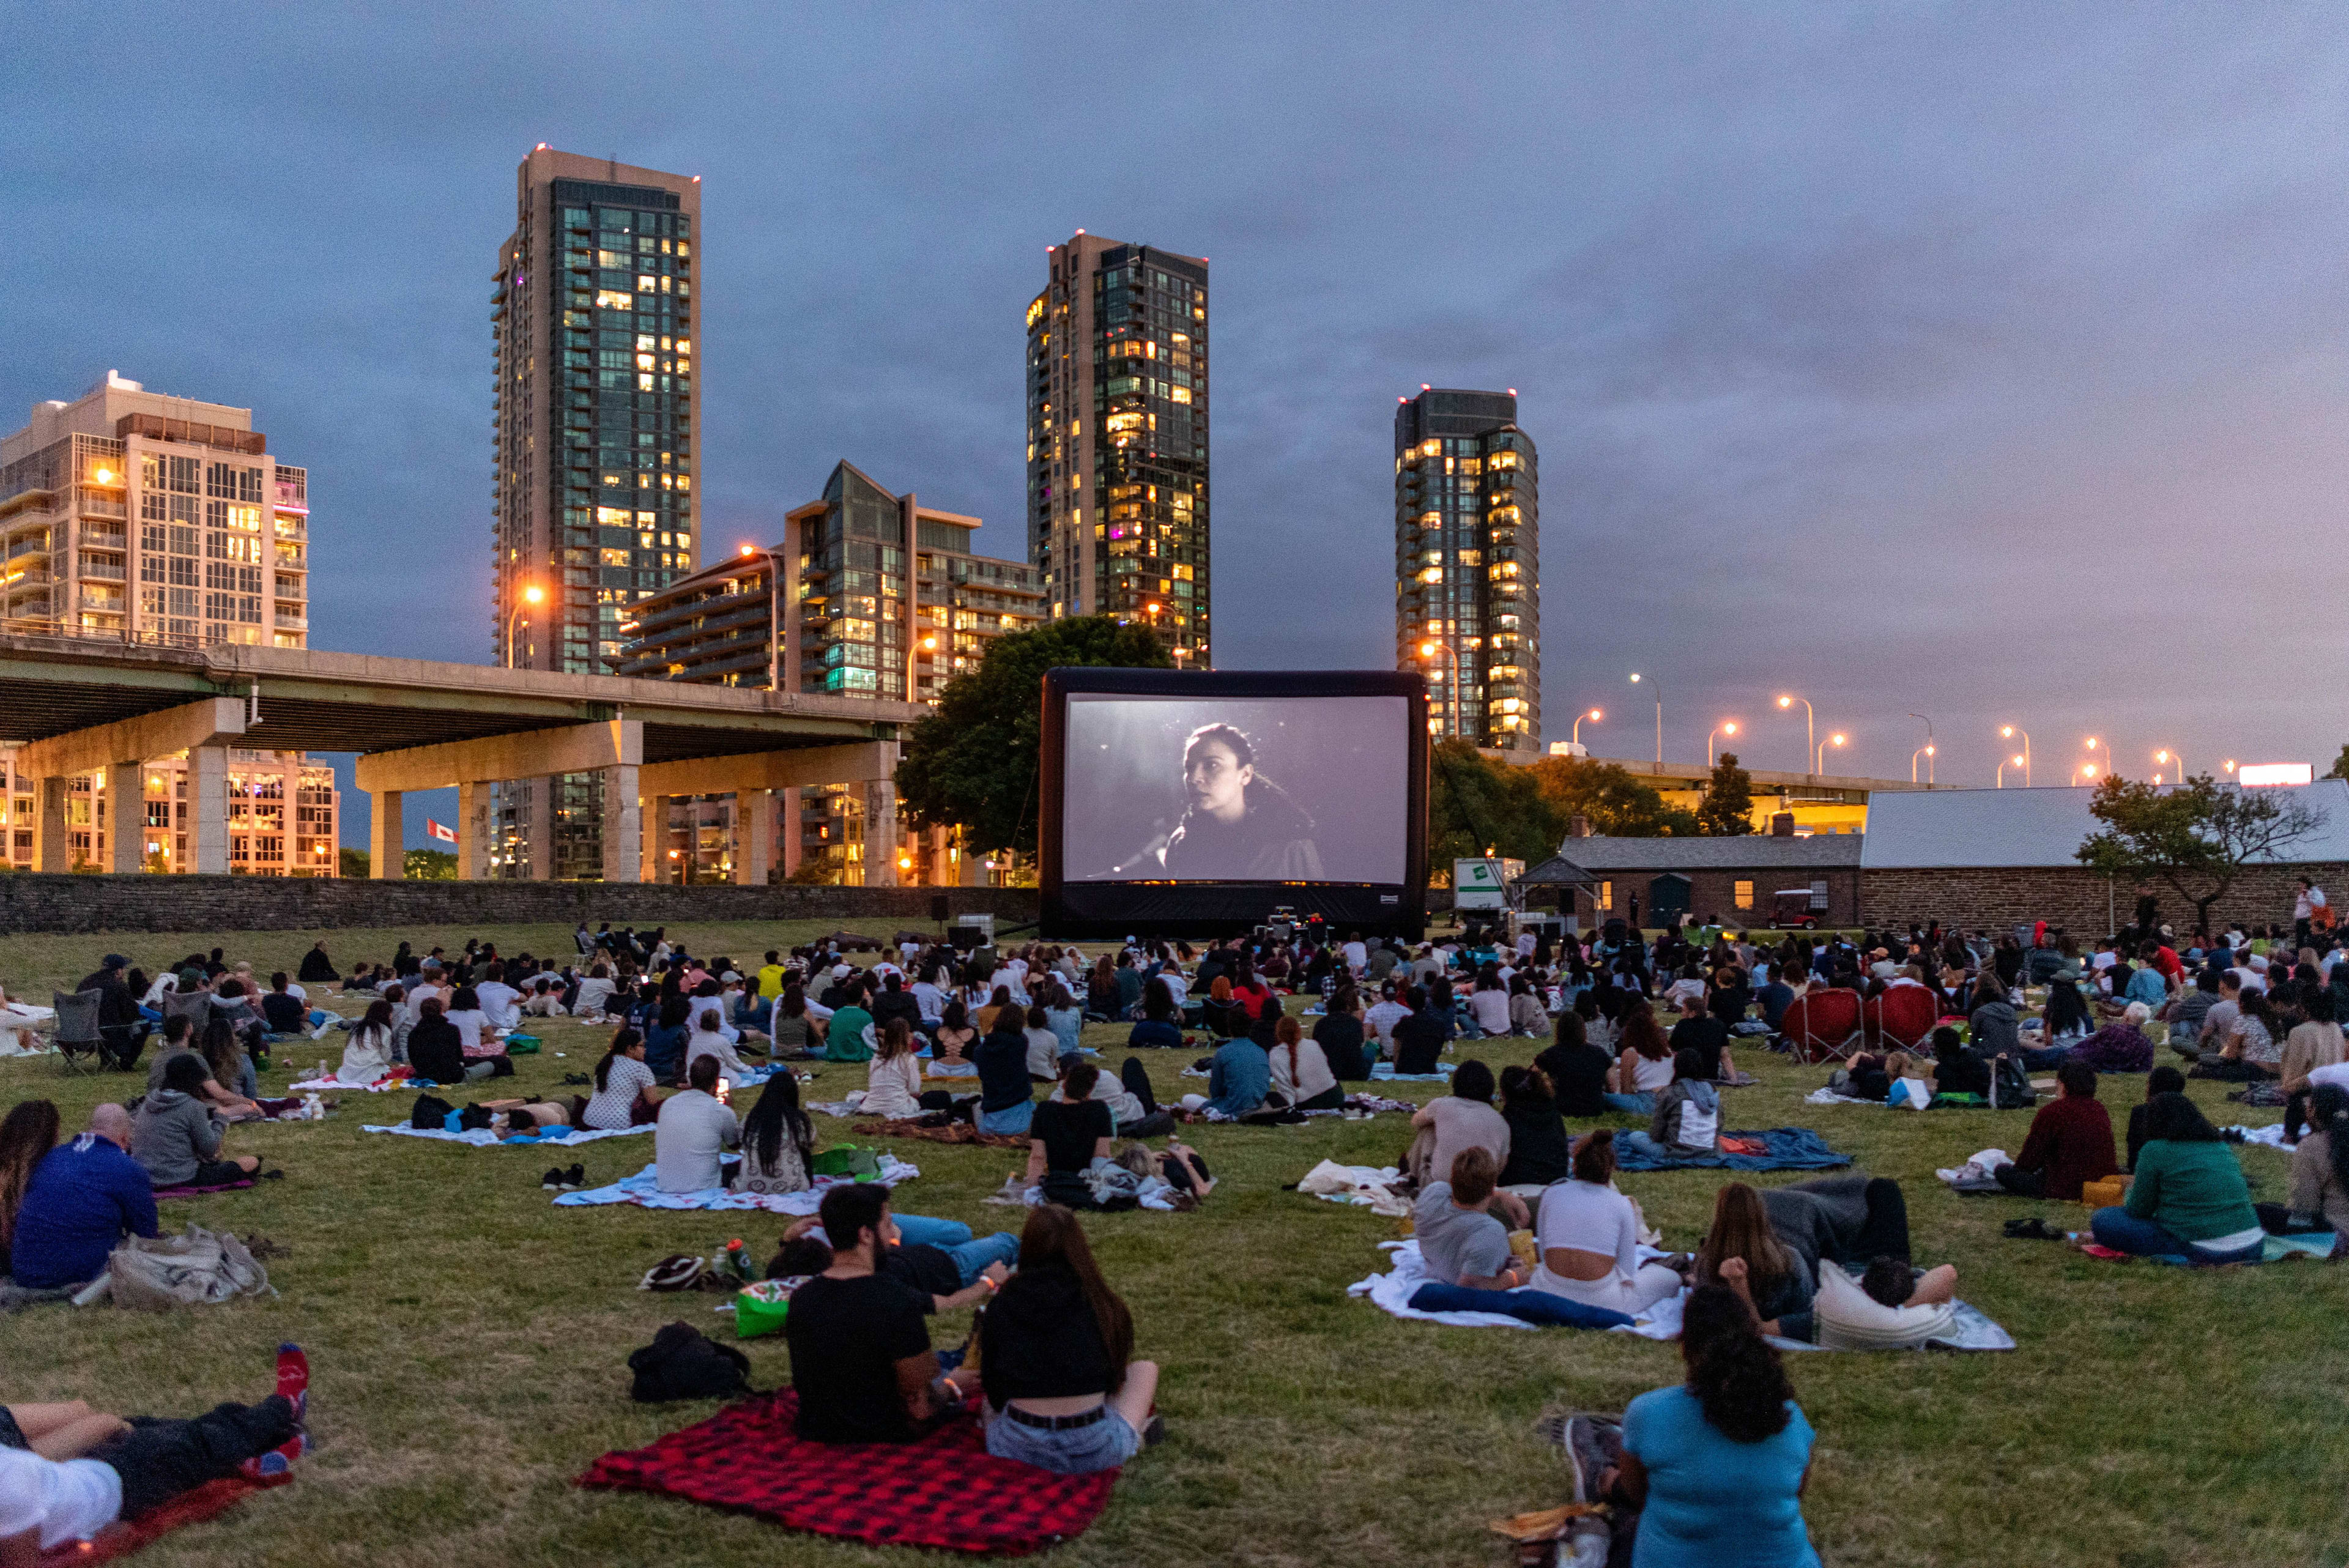 Toronto Outdoor Picture Show playing a movie with people sitting outdoors on blankets watching